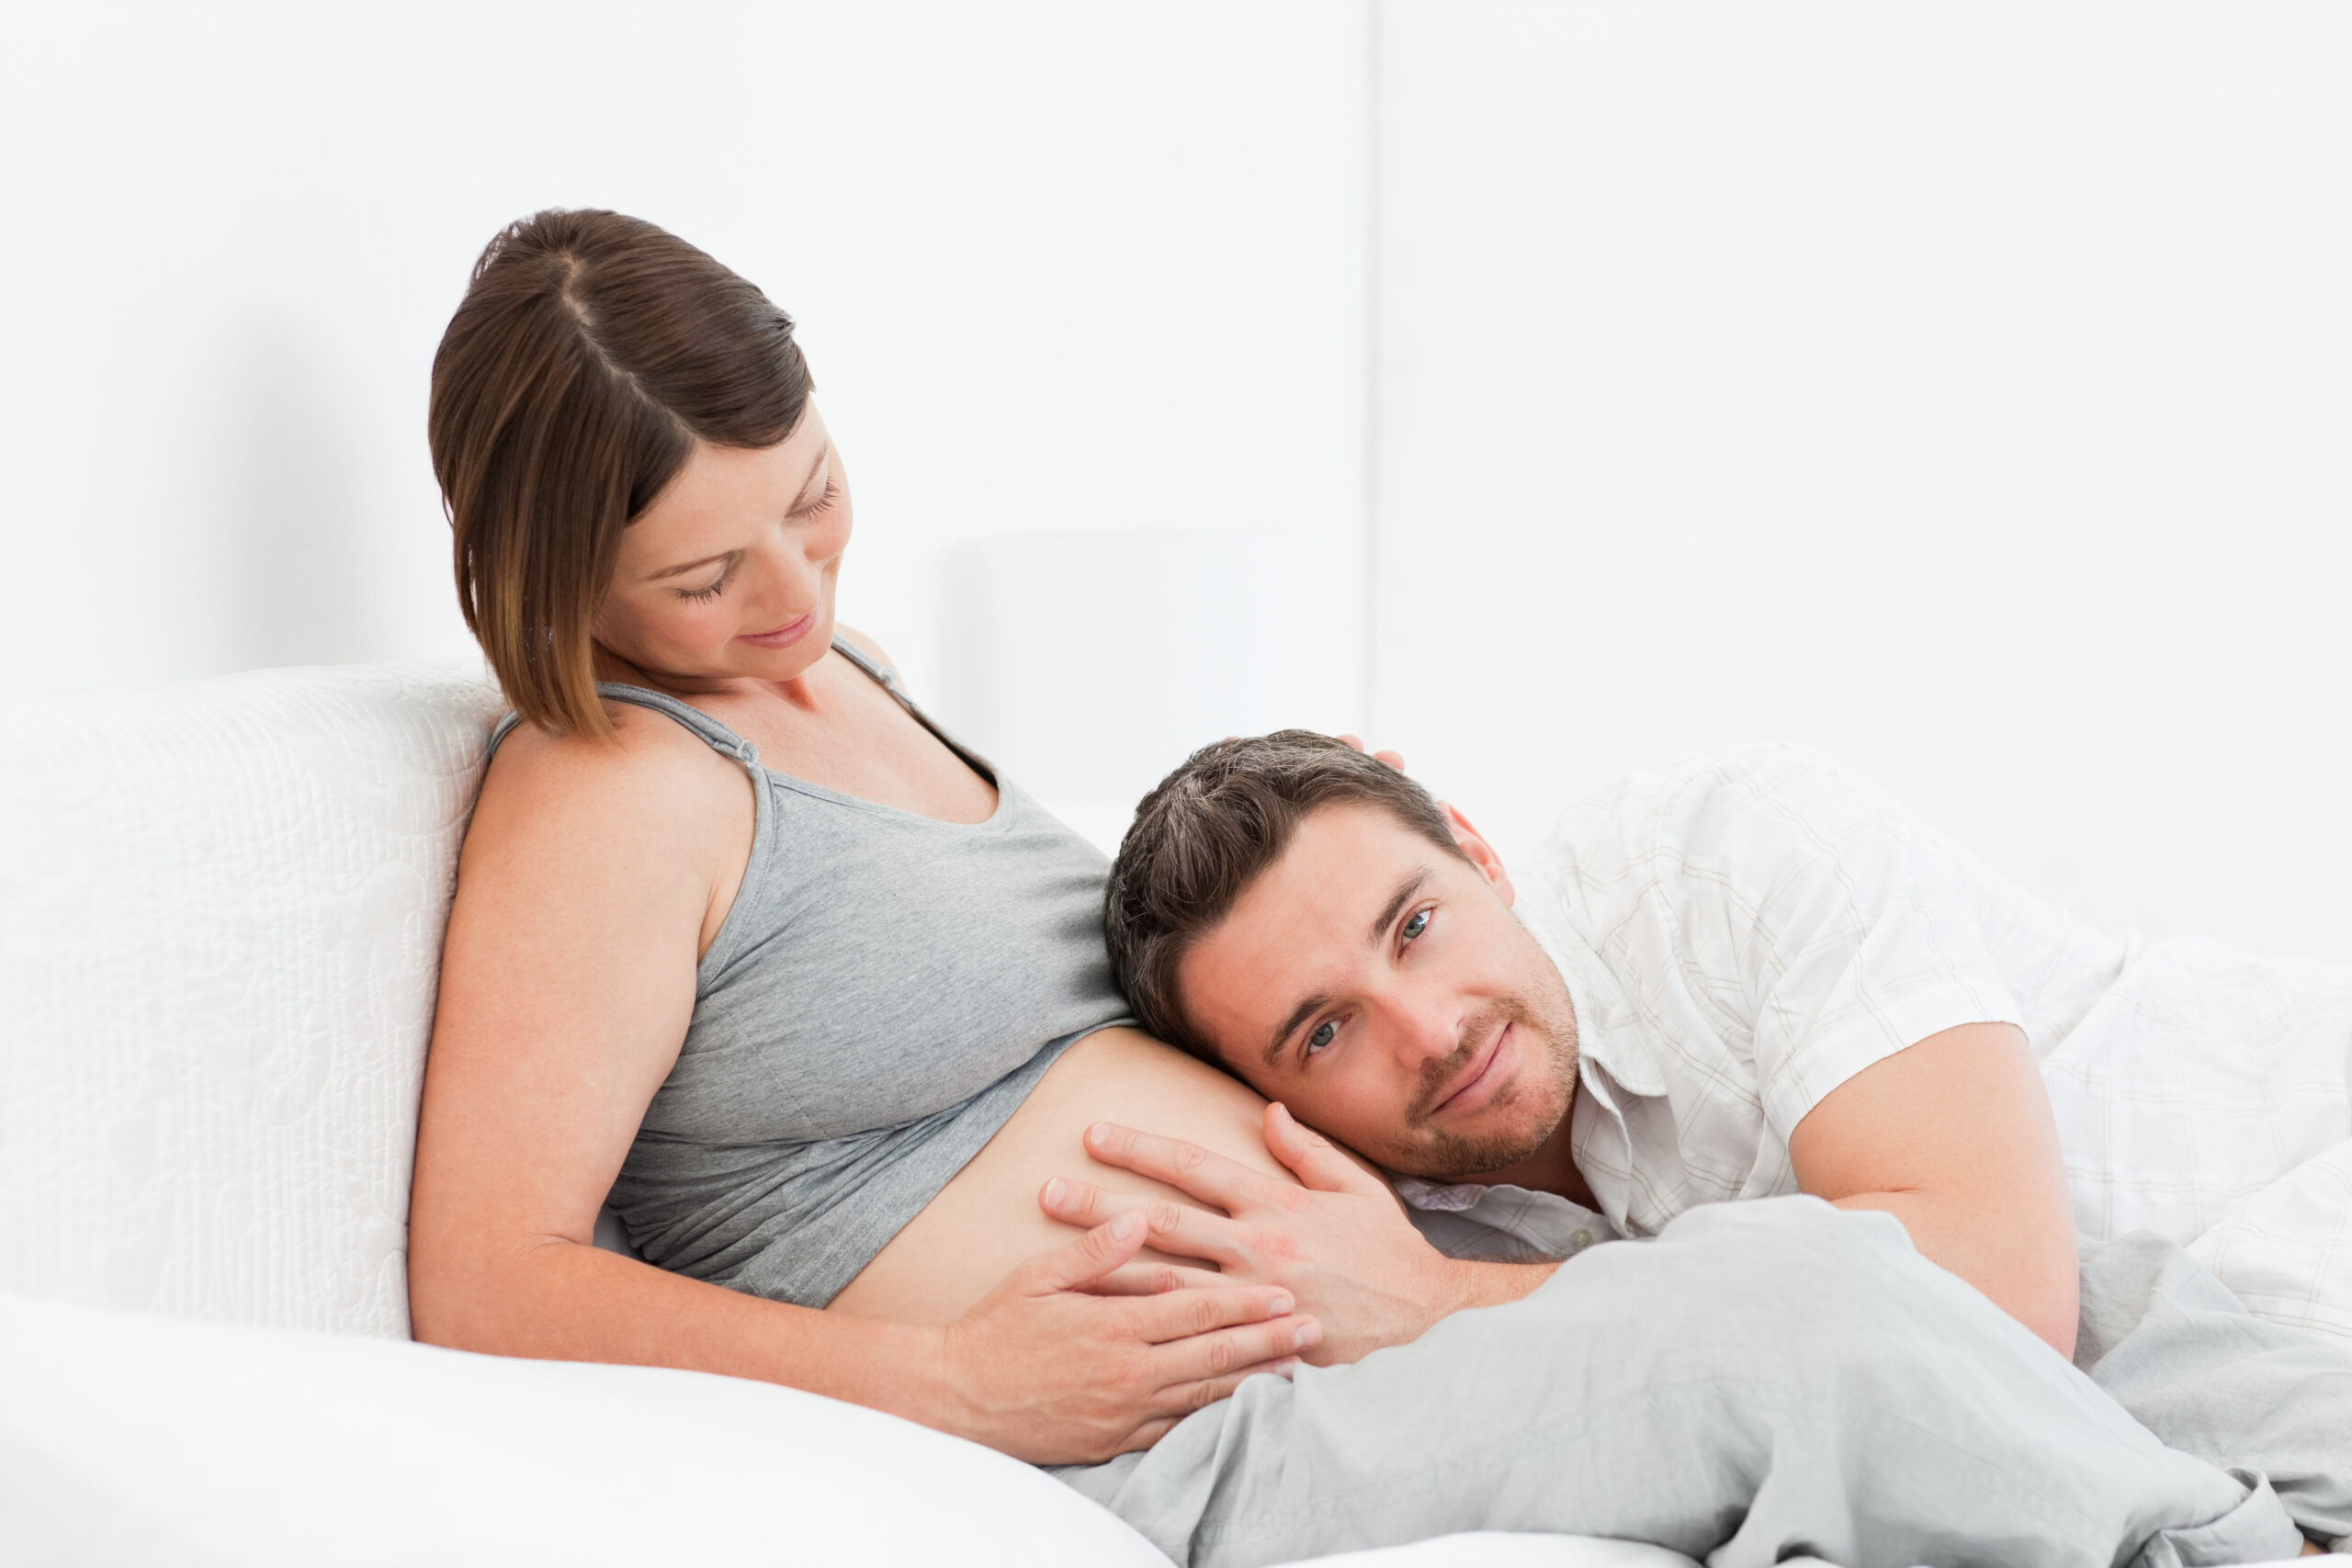 5 responsibilities of a father during pregnancy